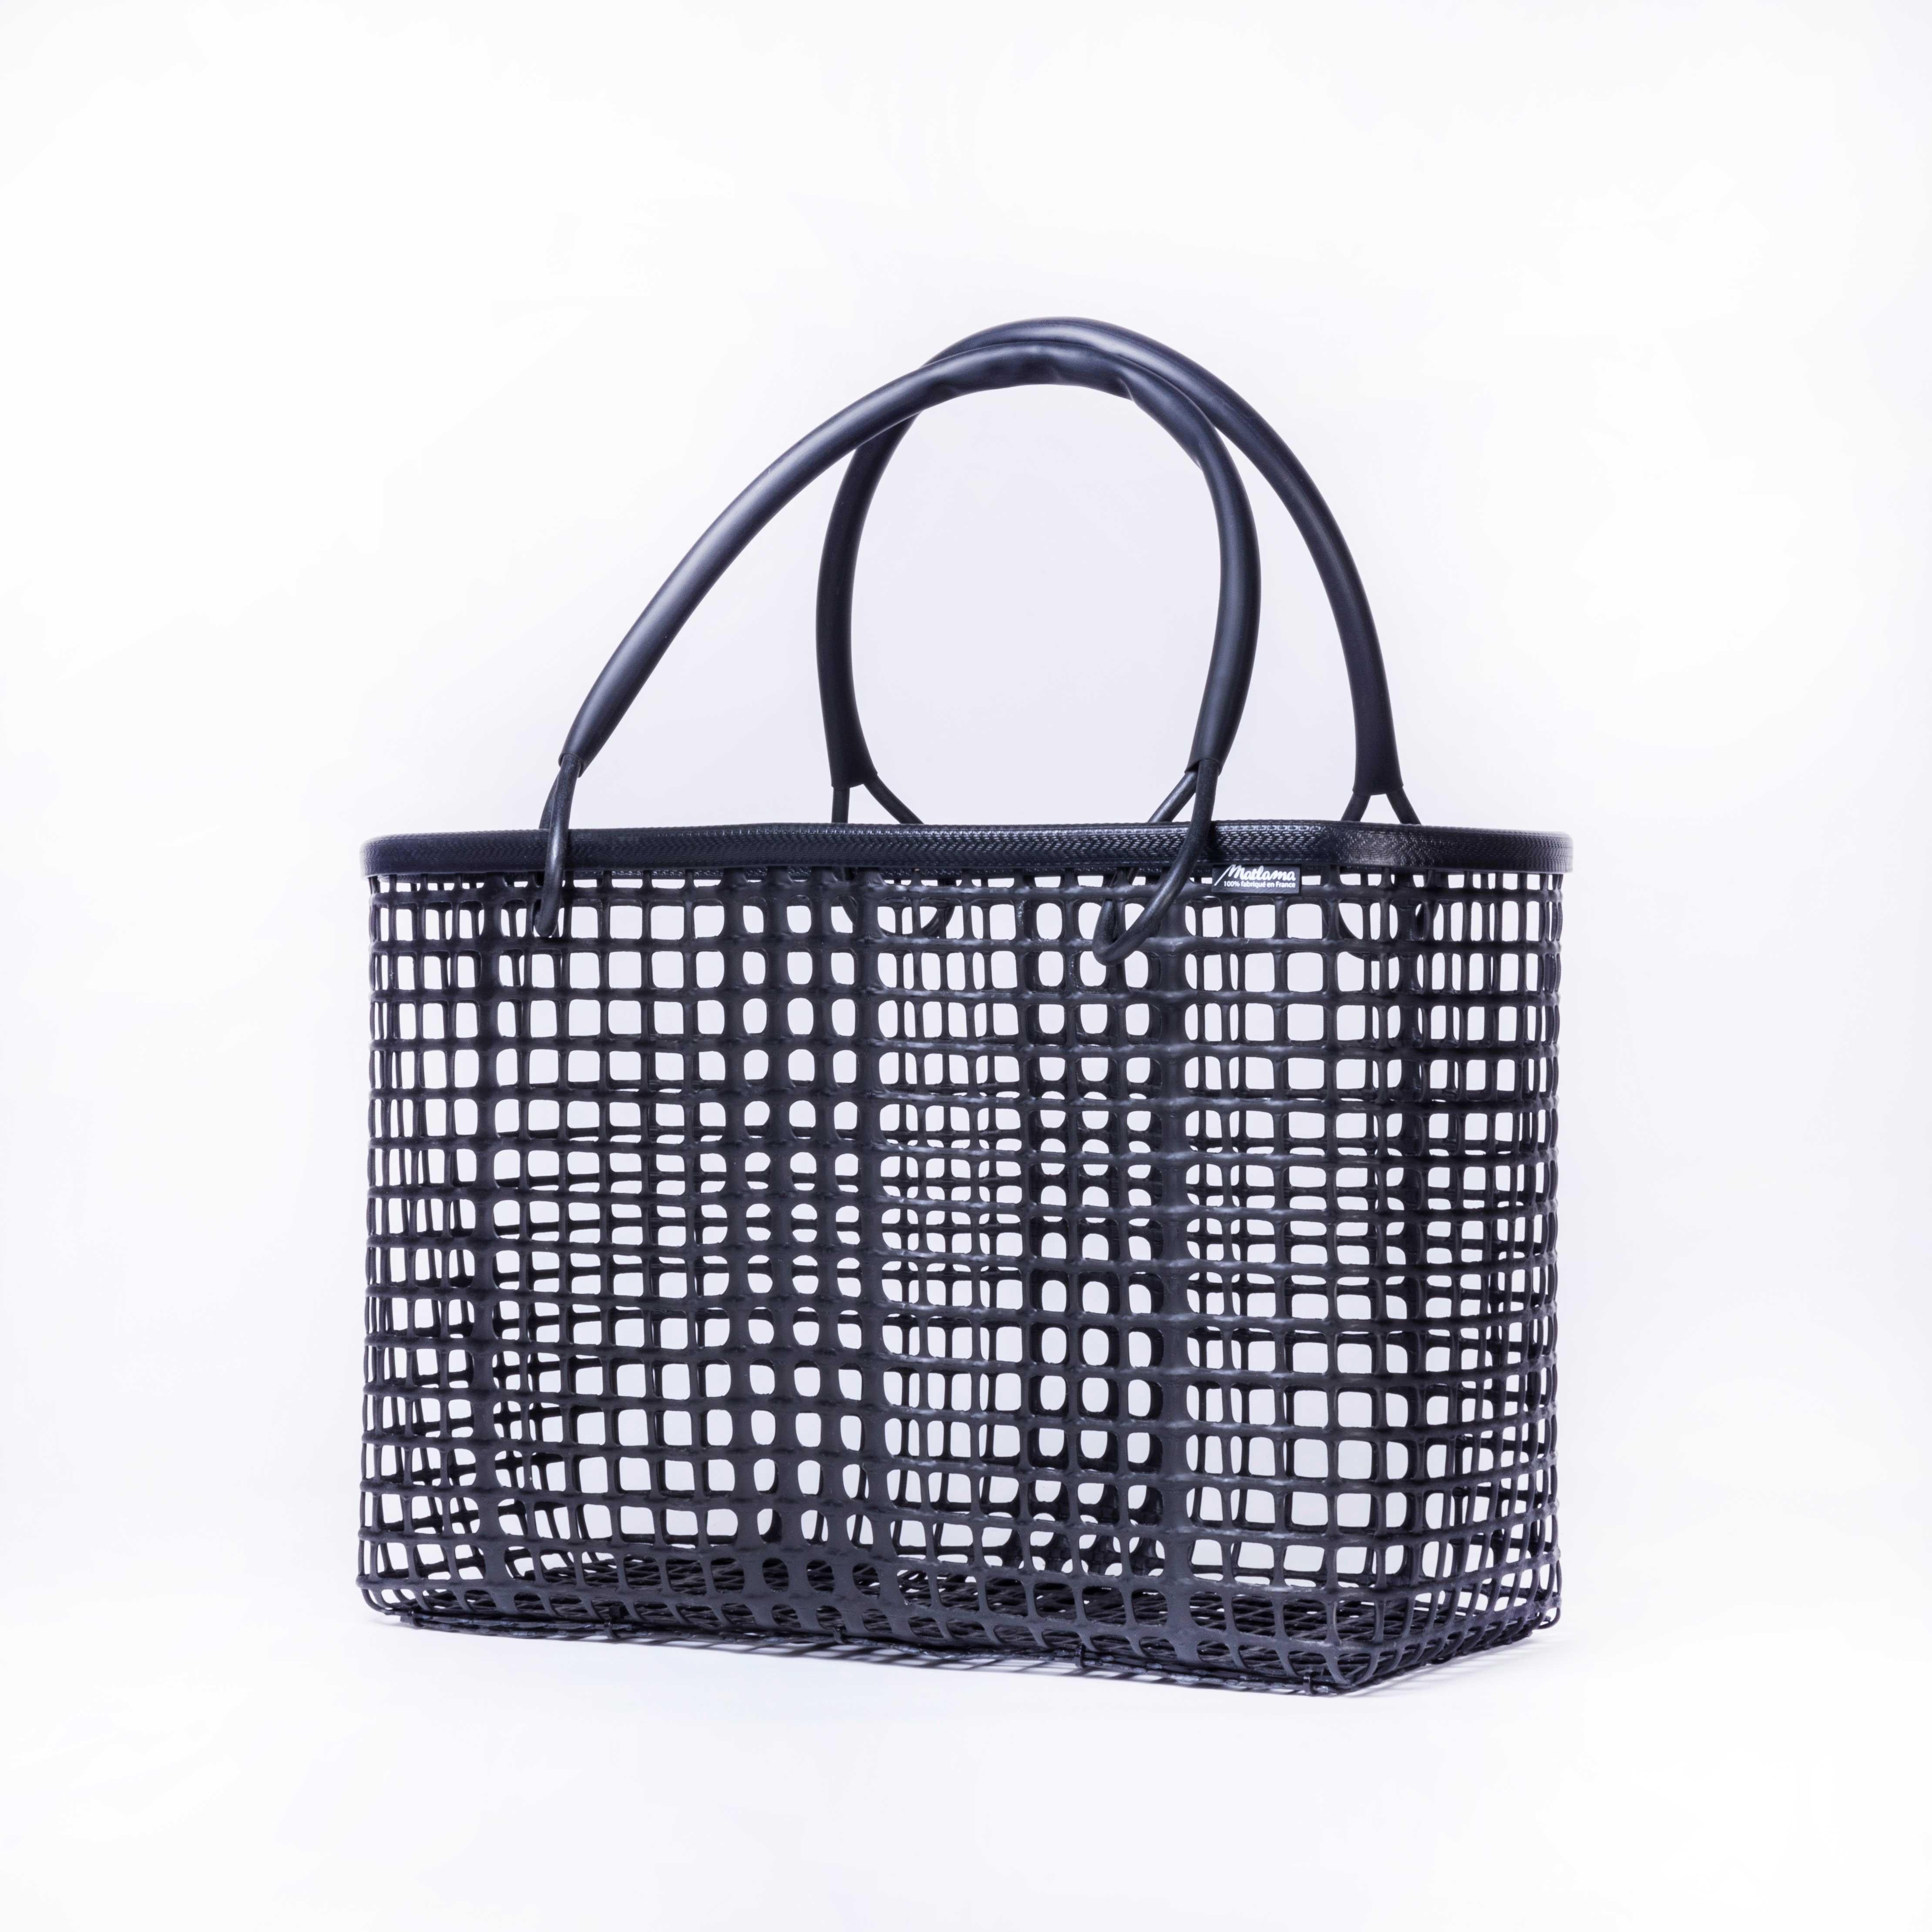 Matlama French Tote bag
Matlama French Tote bag. Contemporary black graphite grey tote bag. Designed by Marina Richer in her workshop in La Rochelle. This is made of the polypropylene mesh used in the manufacture of oyster bags. These pockets are